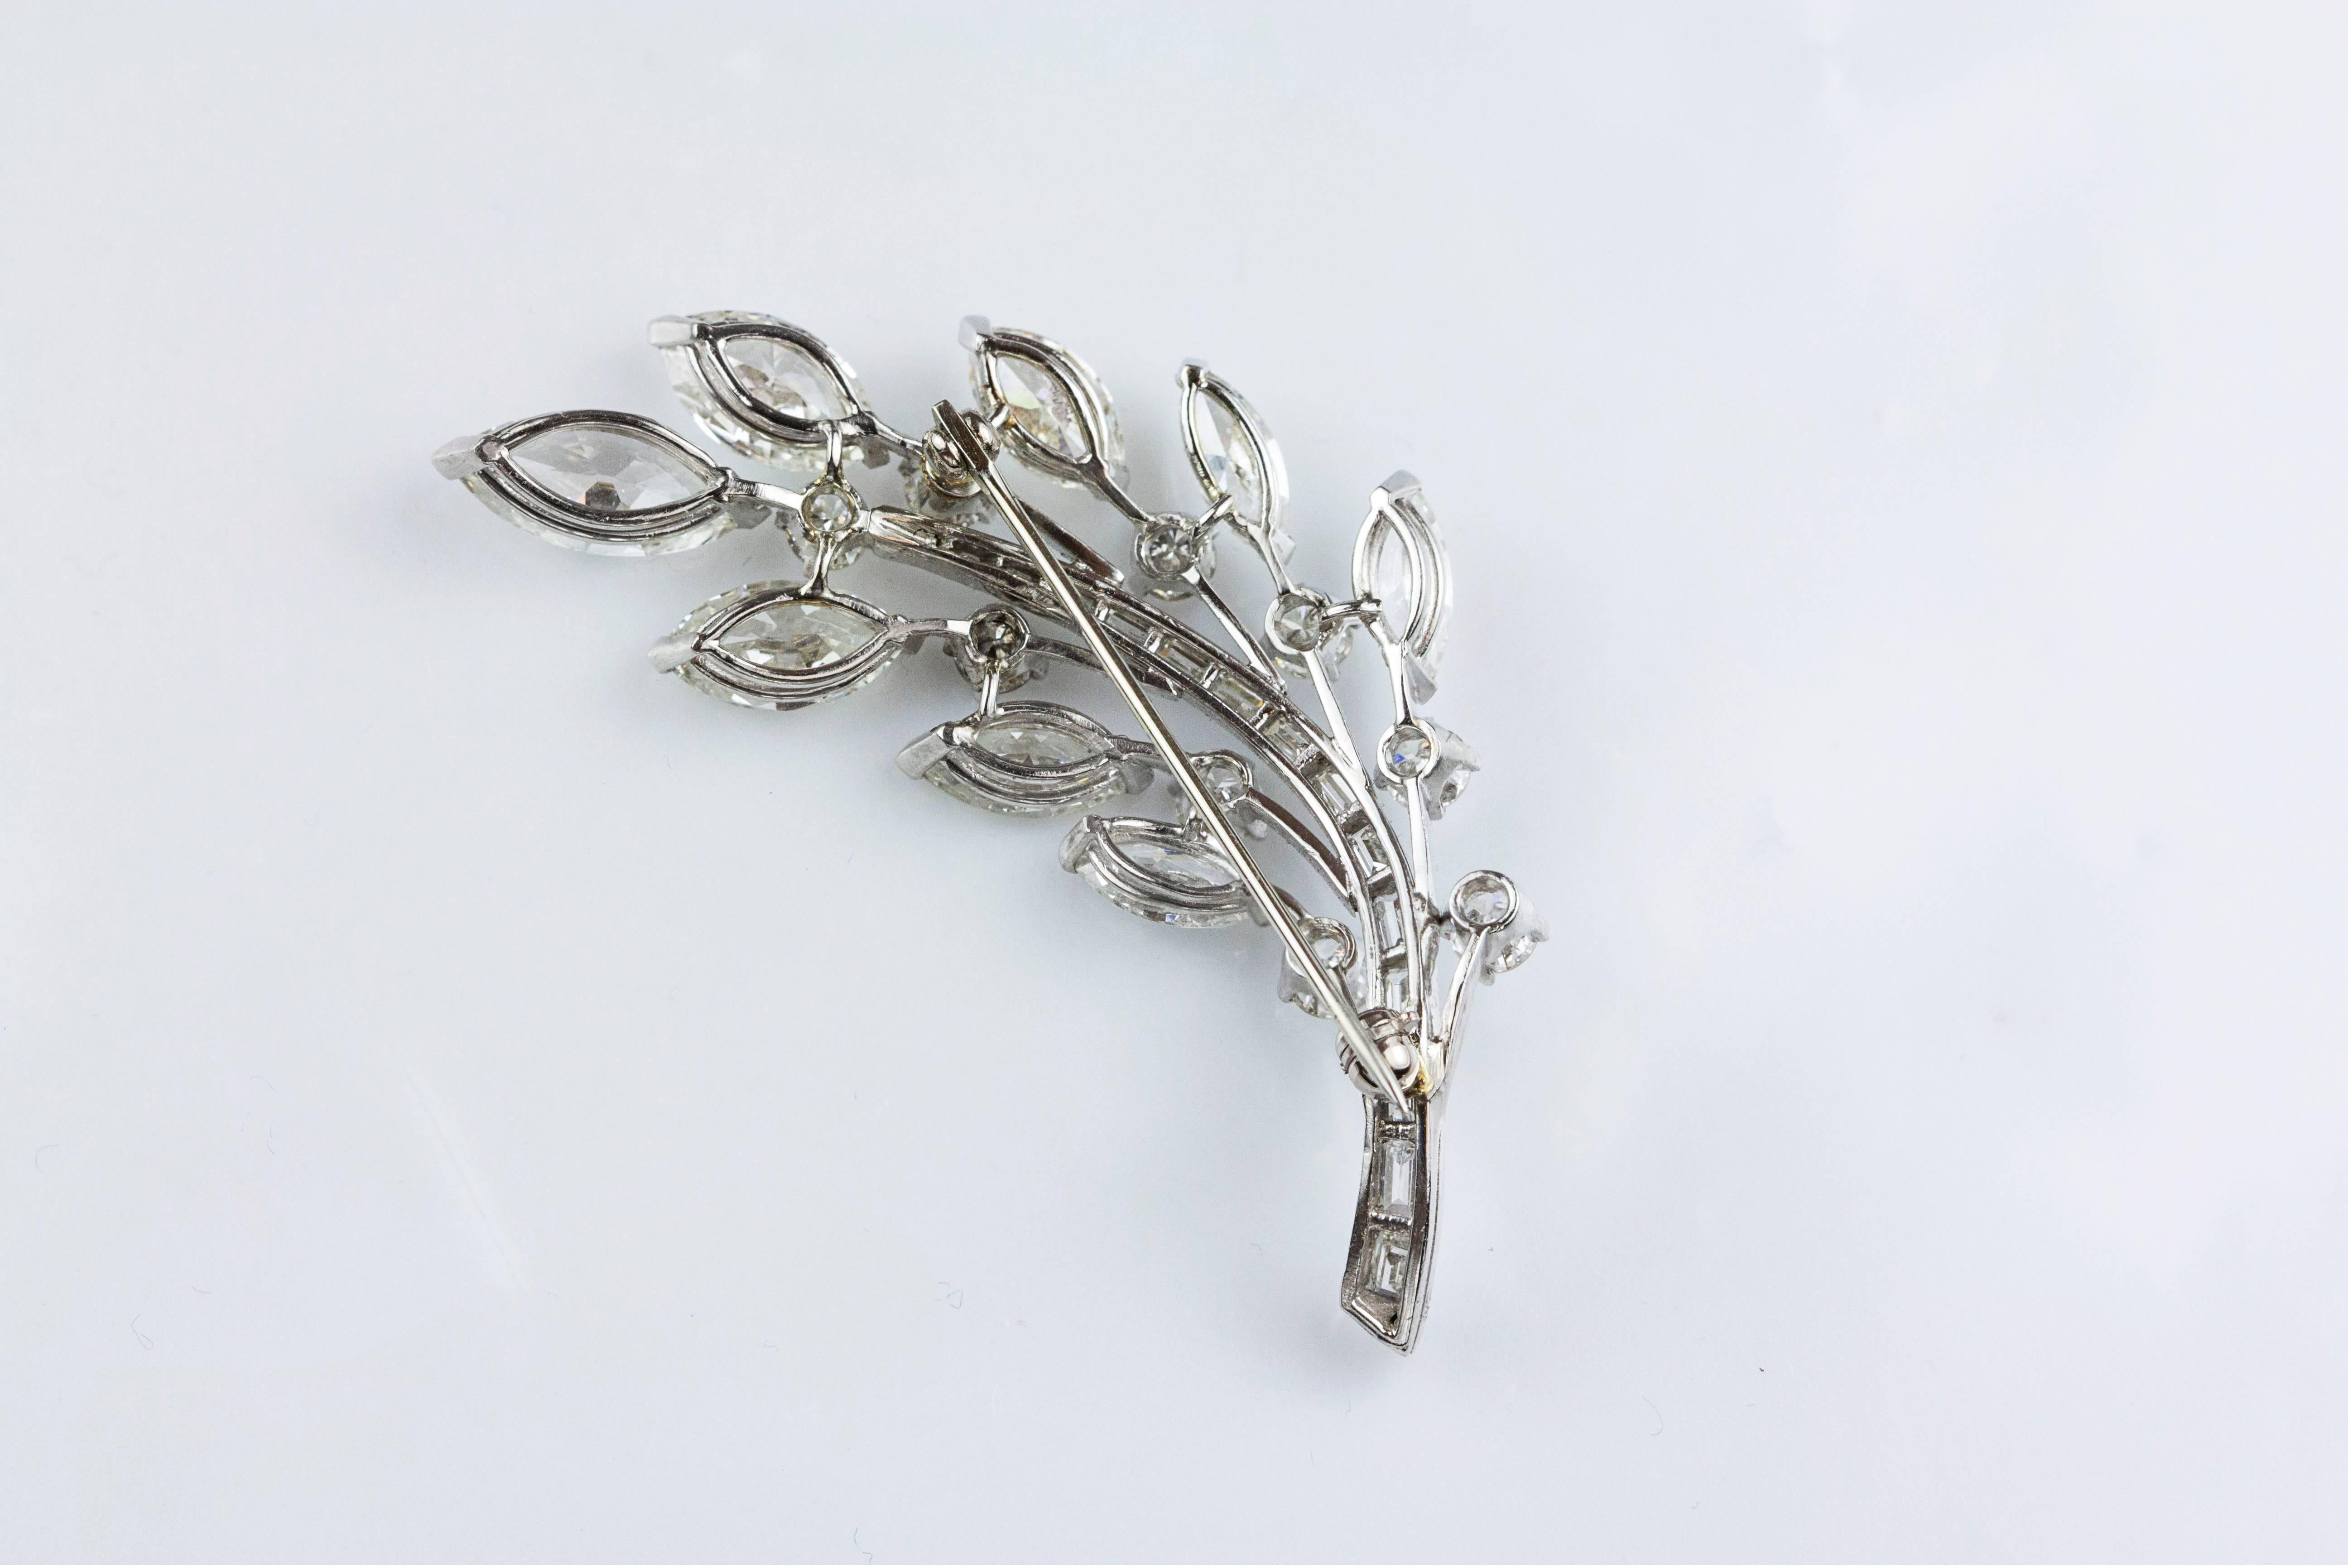 This brooch / pin has a beautiful branch with leaves design. The branch is set with 15 baguettes weighing 1.25 carats total. The leaves are set with 6.63 carats of marquee-cut diamonds accented with 1.53 carats of brilliant round diamonds. Made in